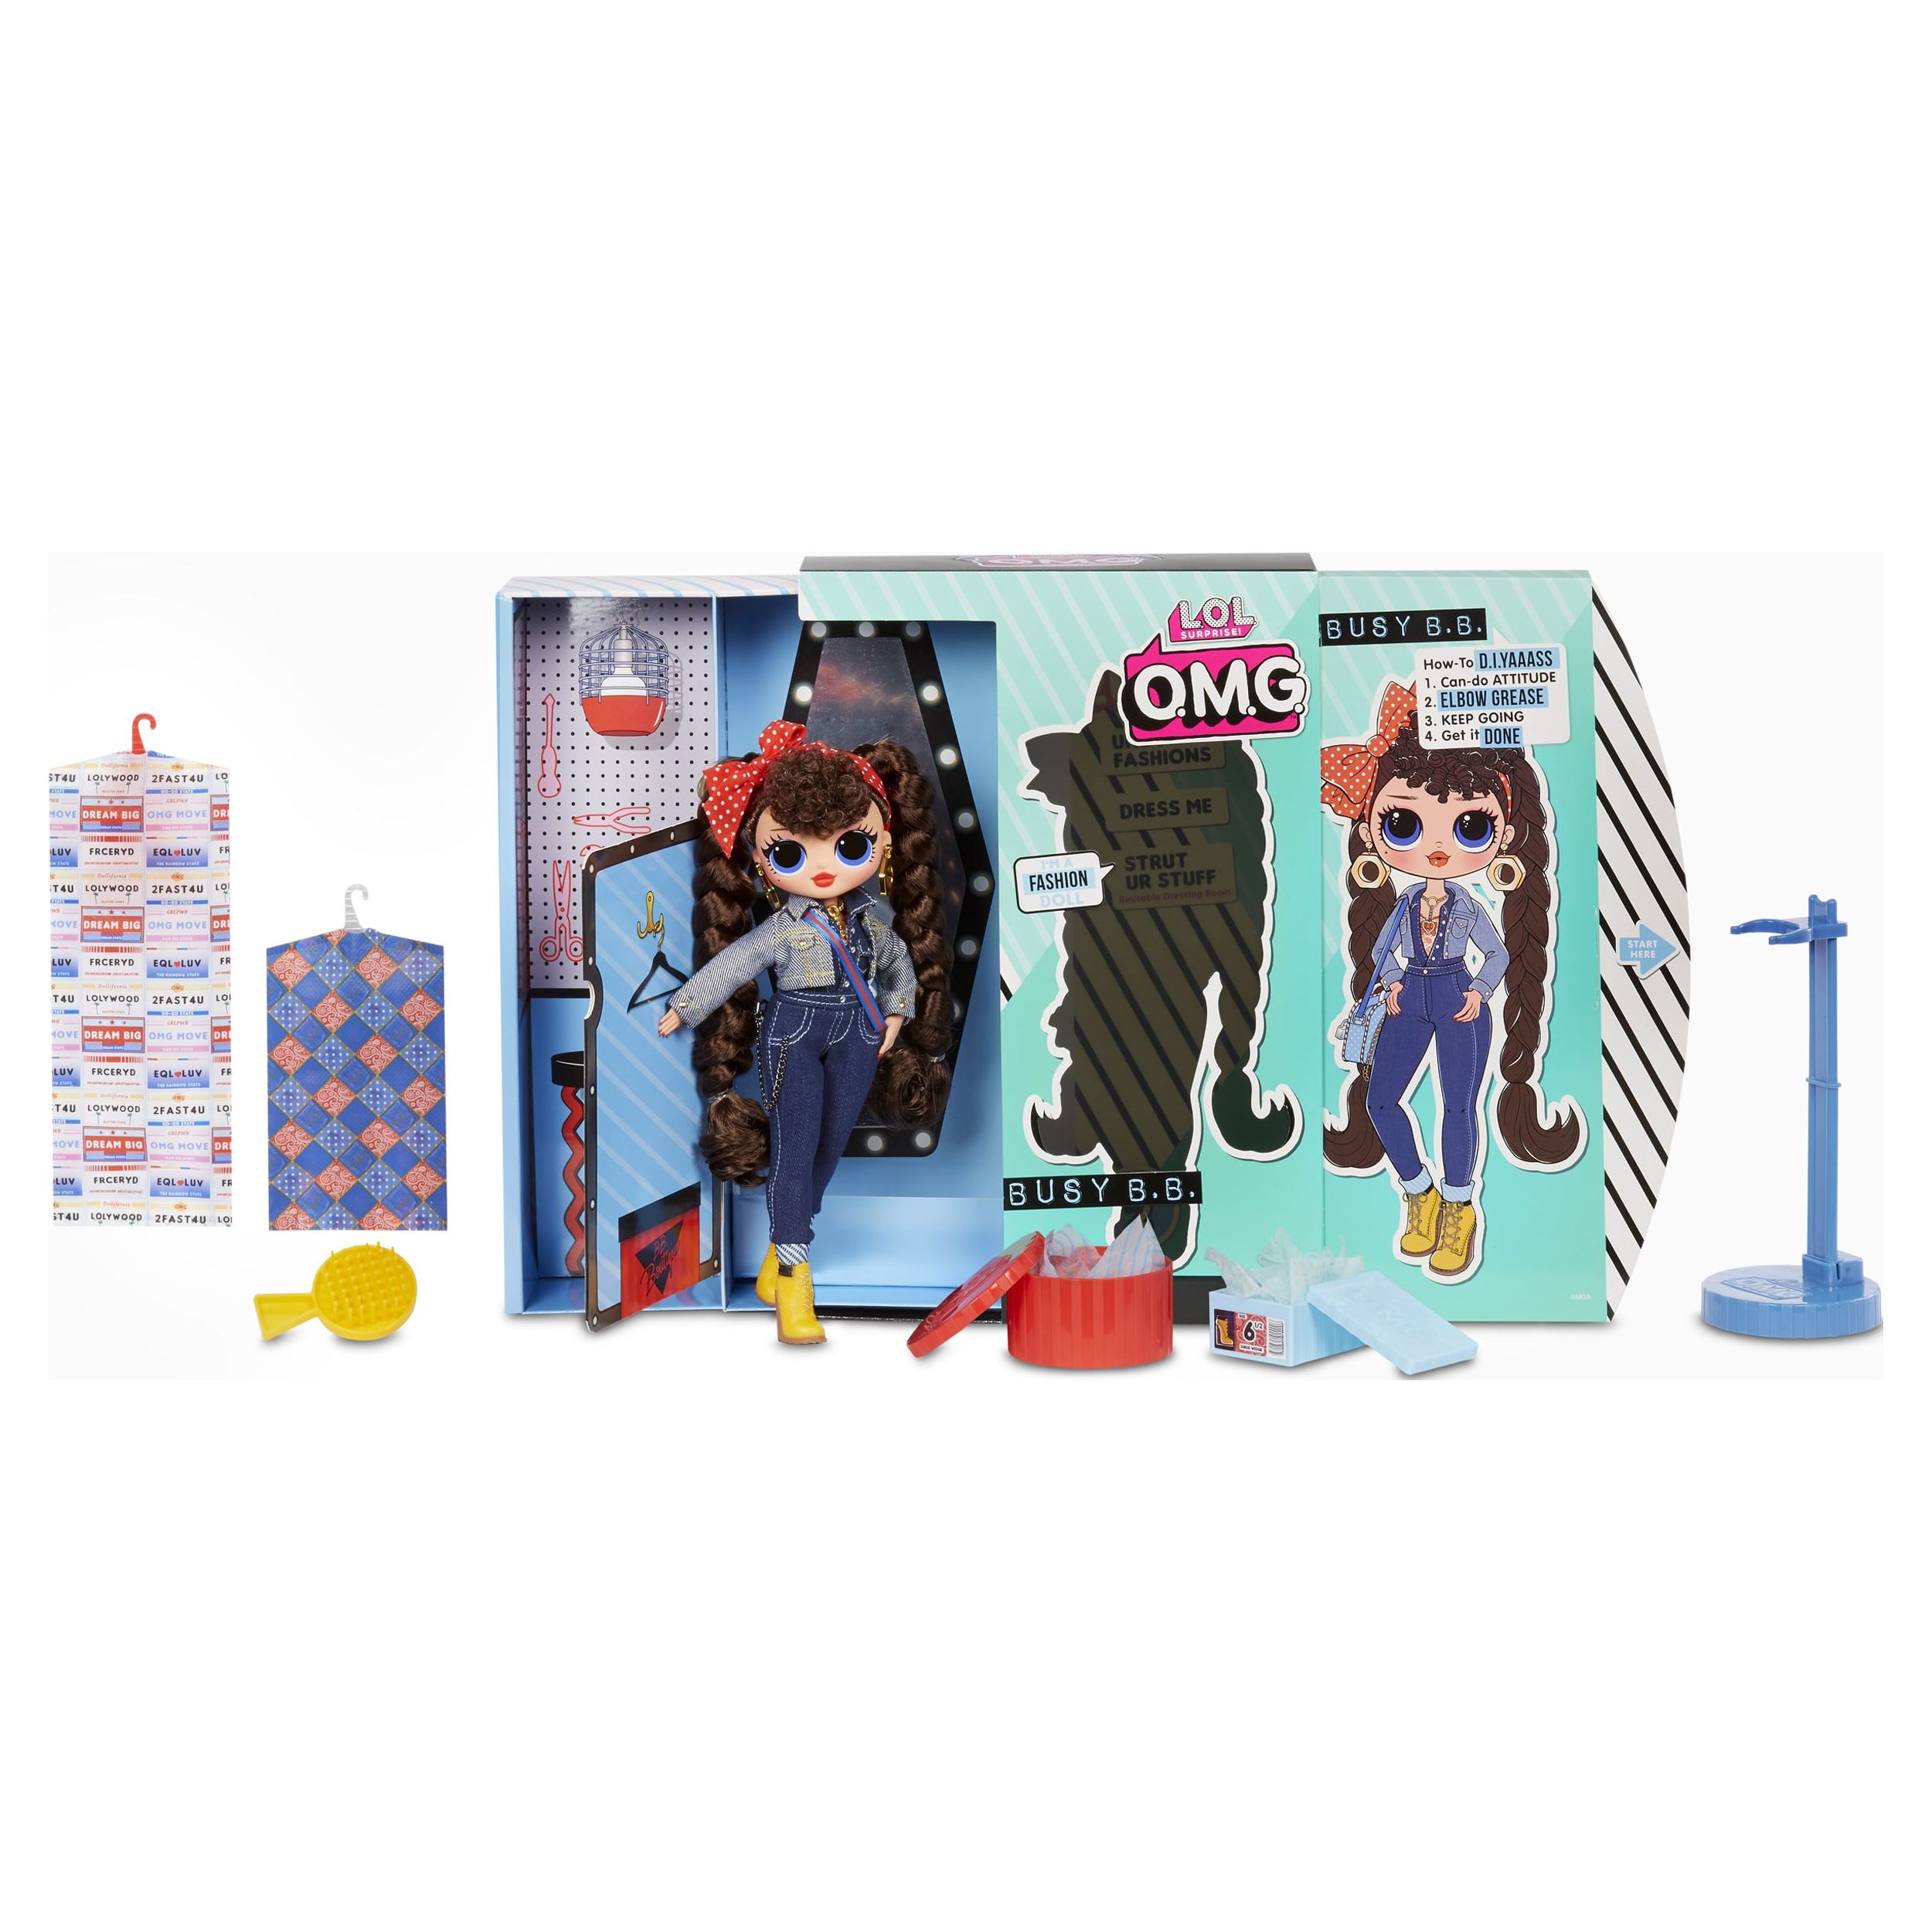 LOL Surprise OMG Busy B.B. Fashion Doll With 20 Surprises, Great Gift for Kids Ages 4 5 6+ - image 2 of 5